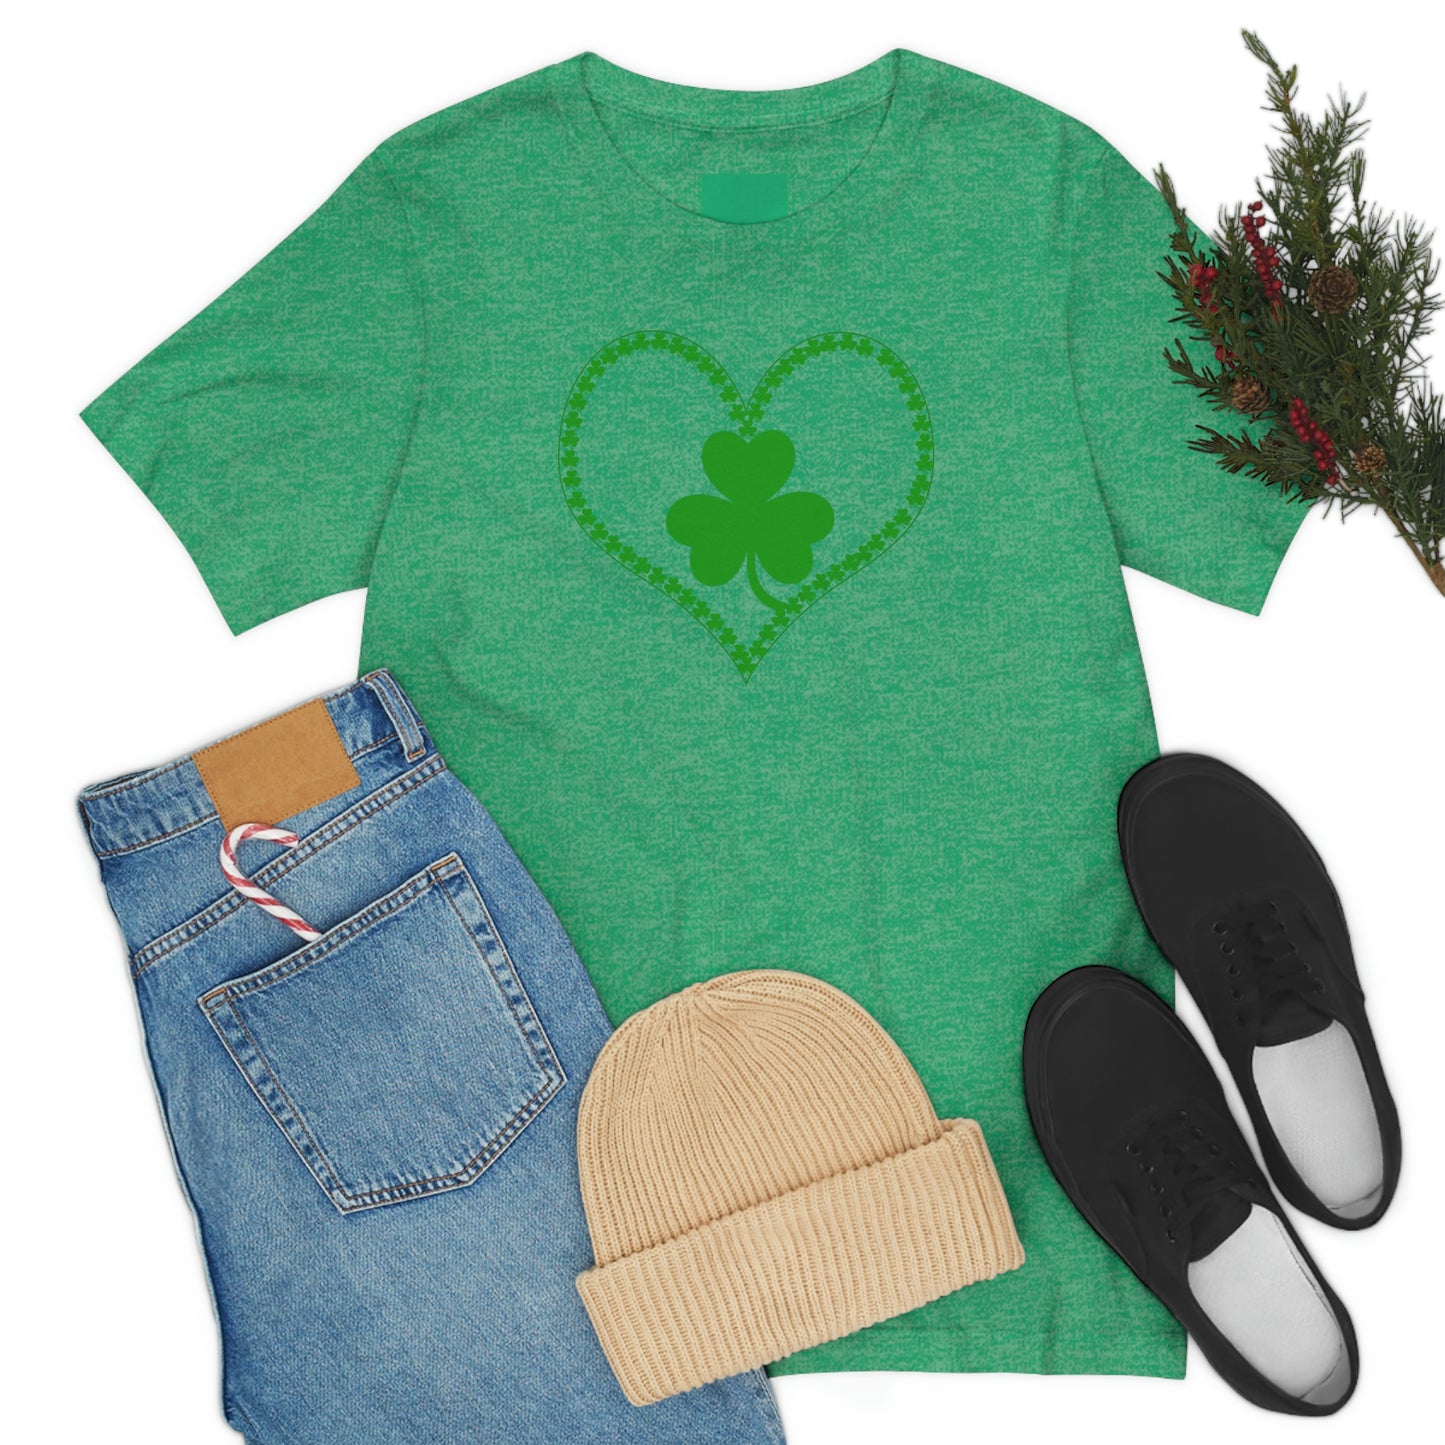 St Patrick's Day shirt Feeling Lucky Shirt One Lucky Teacher Shirt St Patrick's Day shirt - Funny St Paddy's day Funny Shirt Shamrock shirt